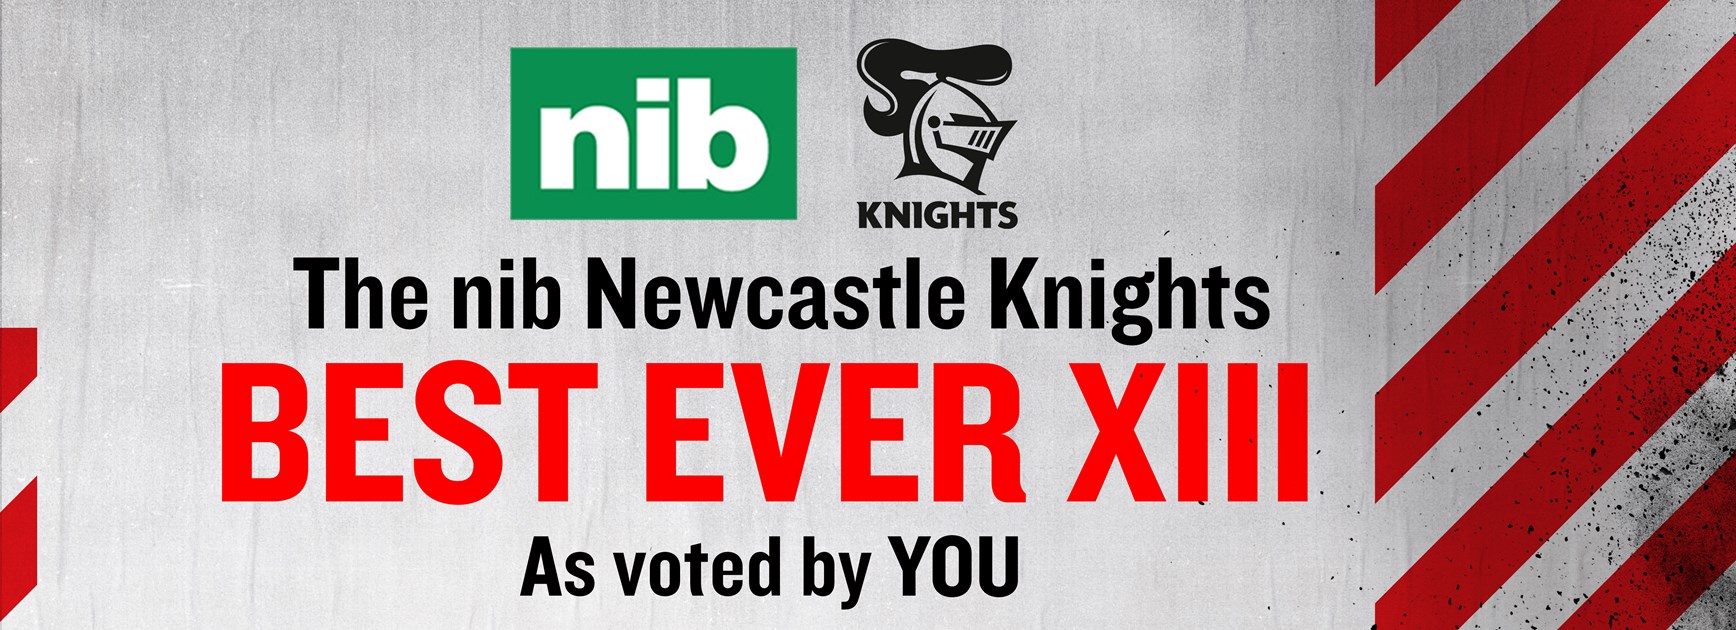 The best ever nib Newcastle Knights XIII, as voted by YOU